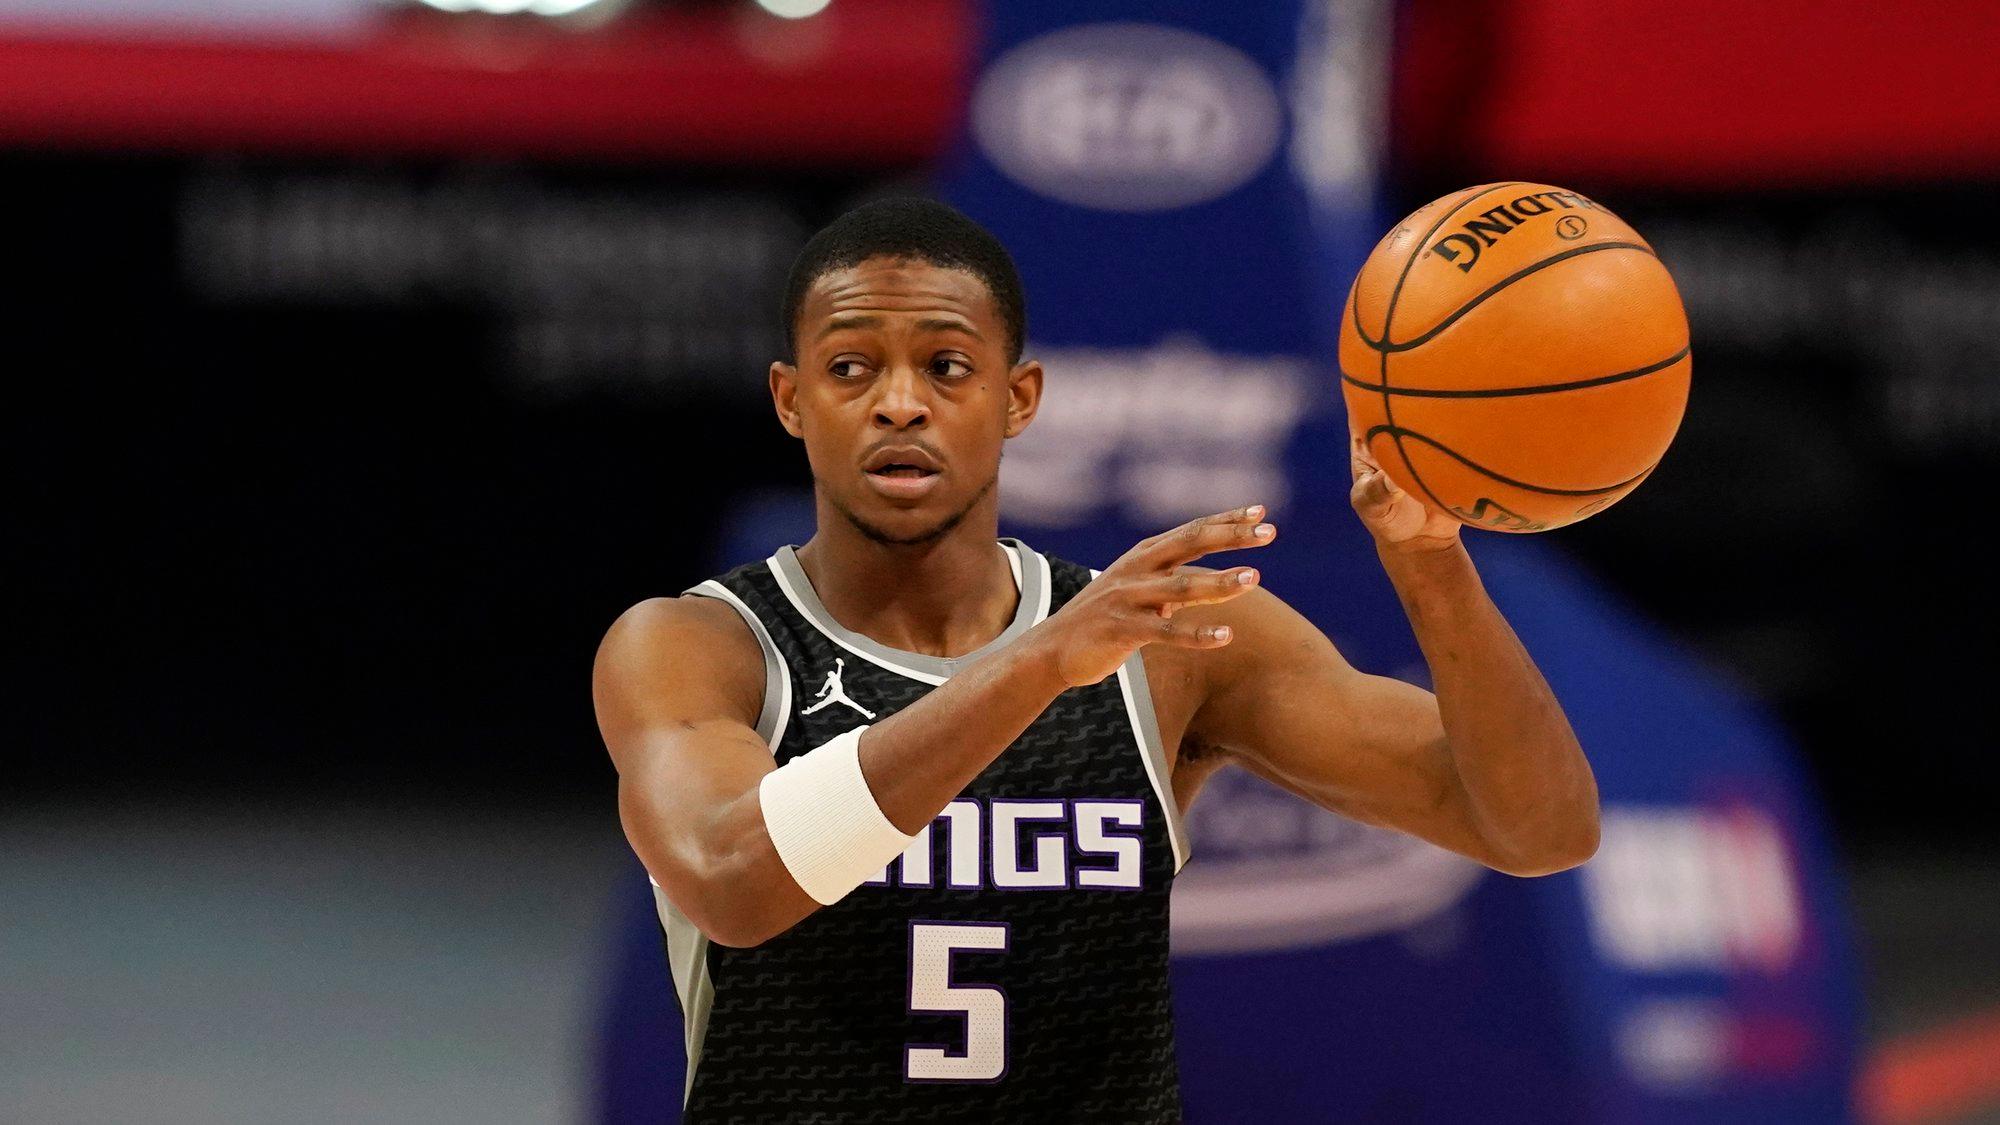 The Kings are 1-11 ATS entering their Showdown Against the Trail Blazers